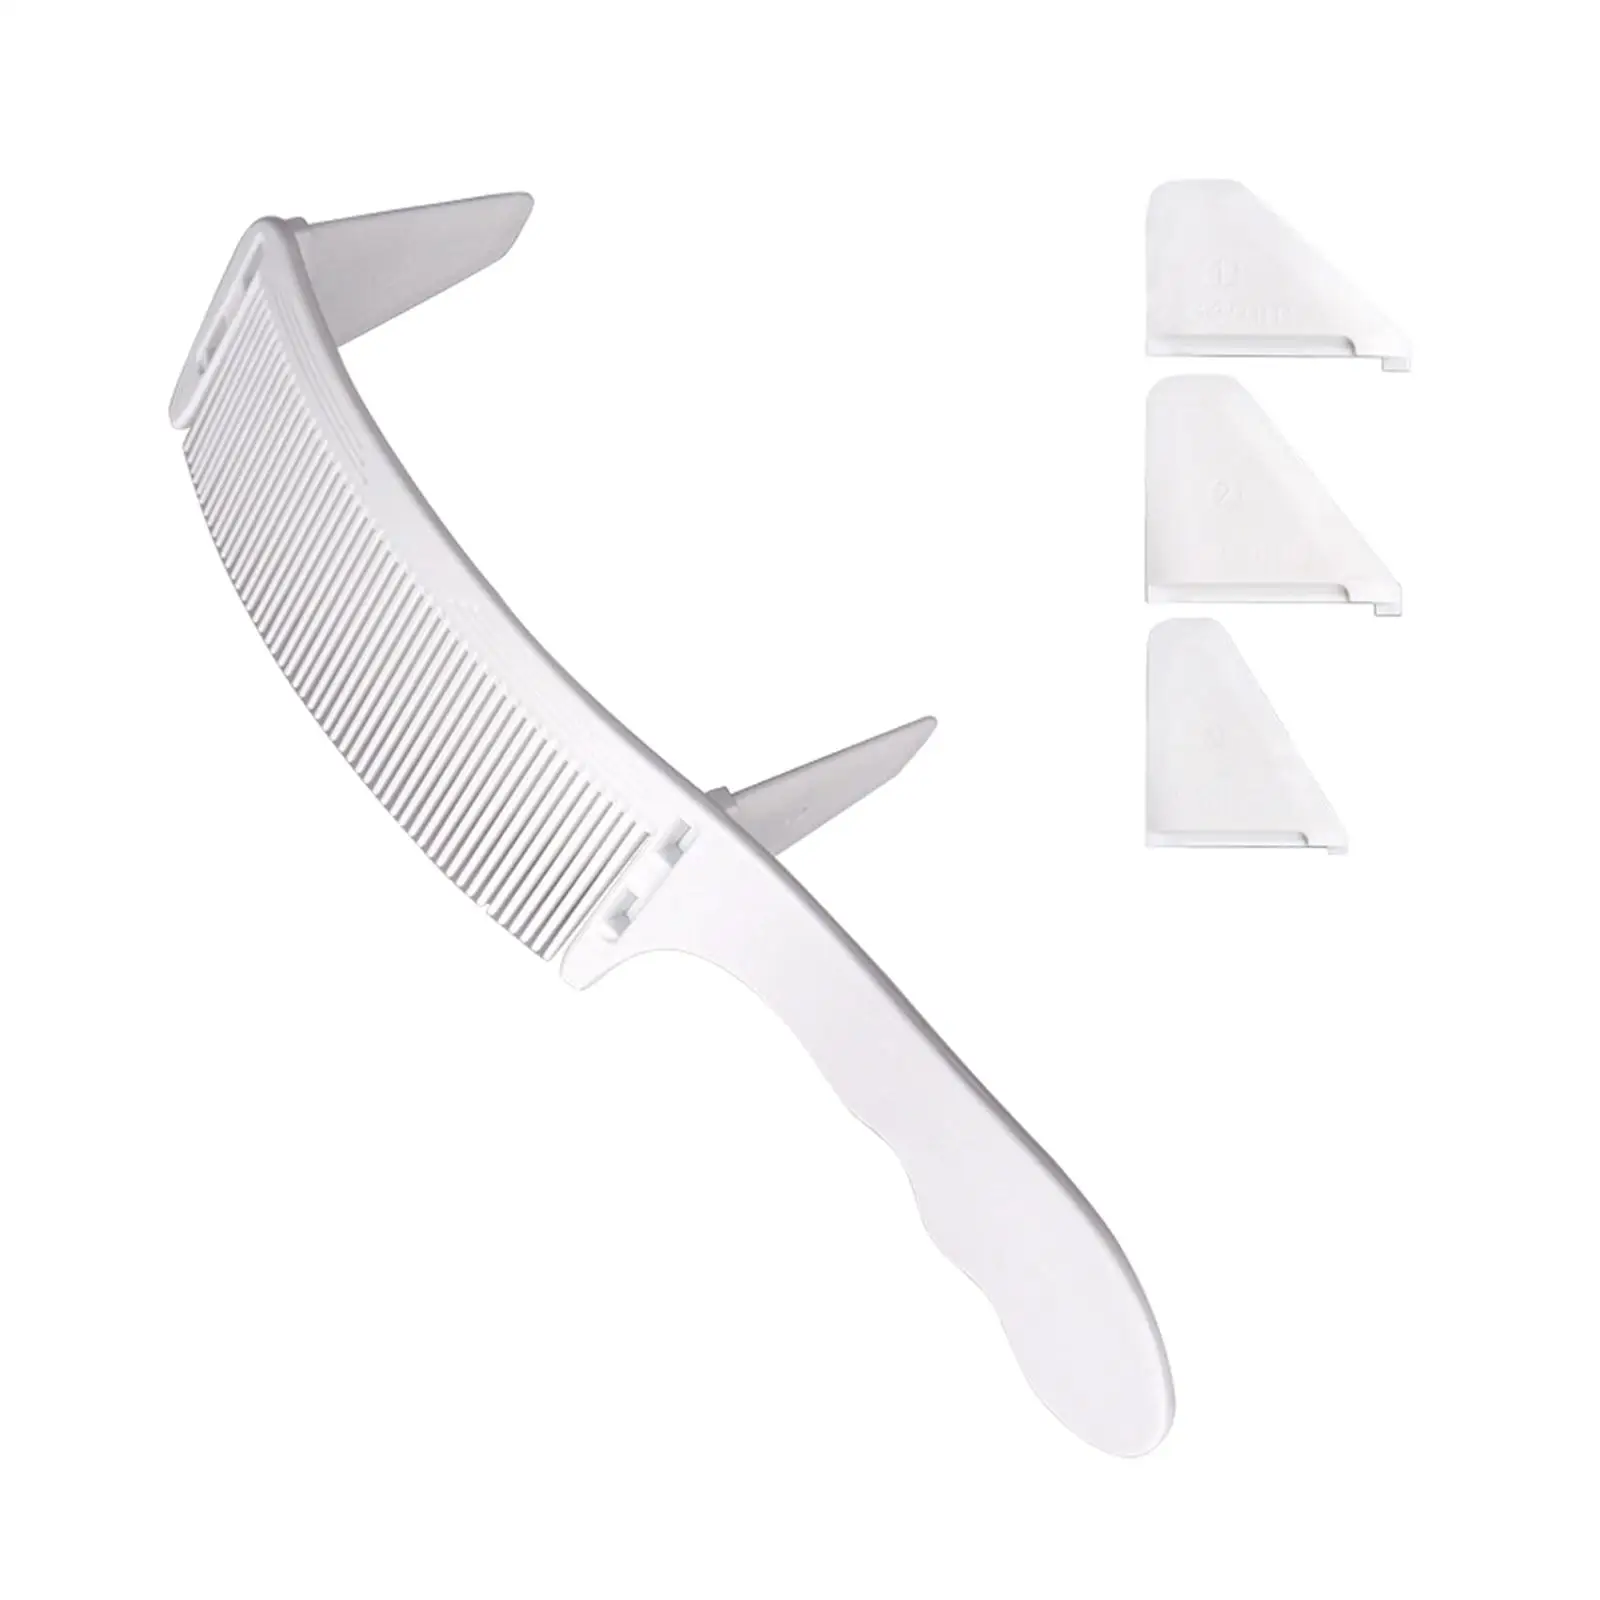 2xDurable Curved Comb for Hairdresser Hairstylist Back Hair Styling White